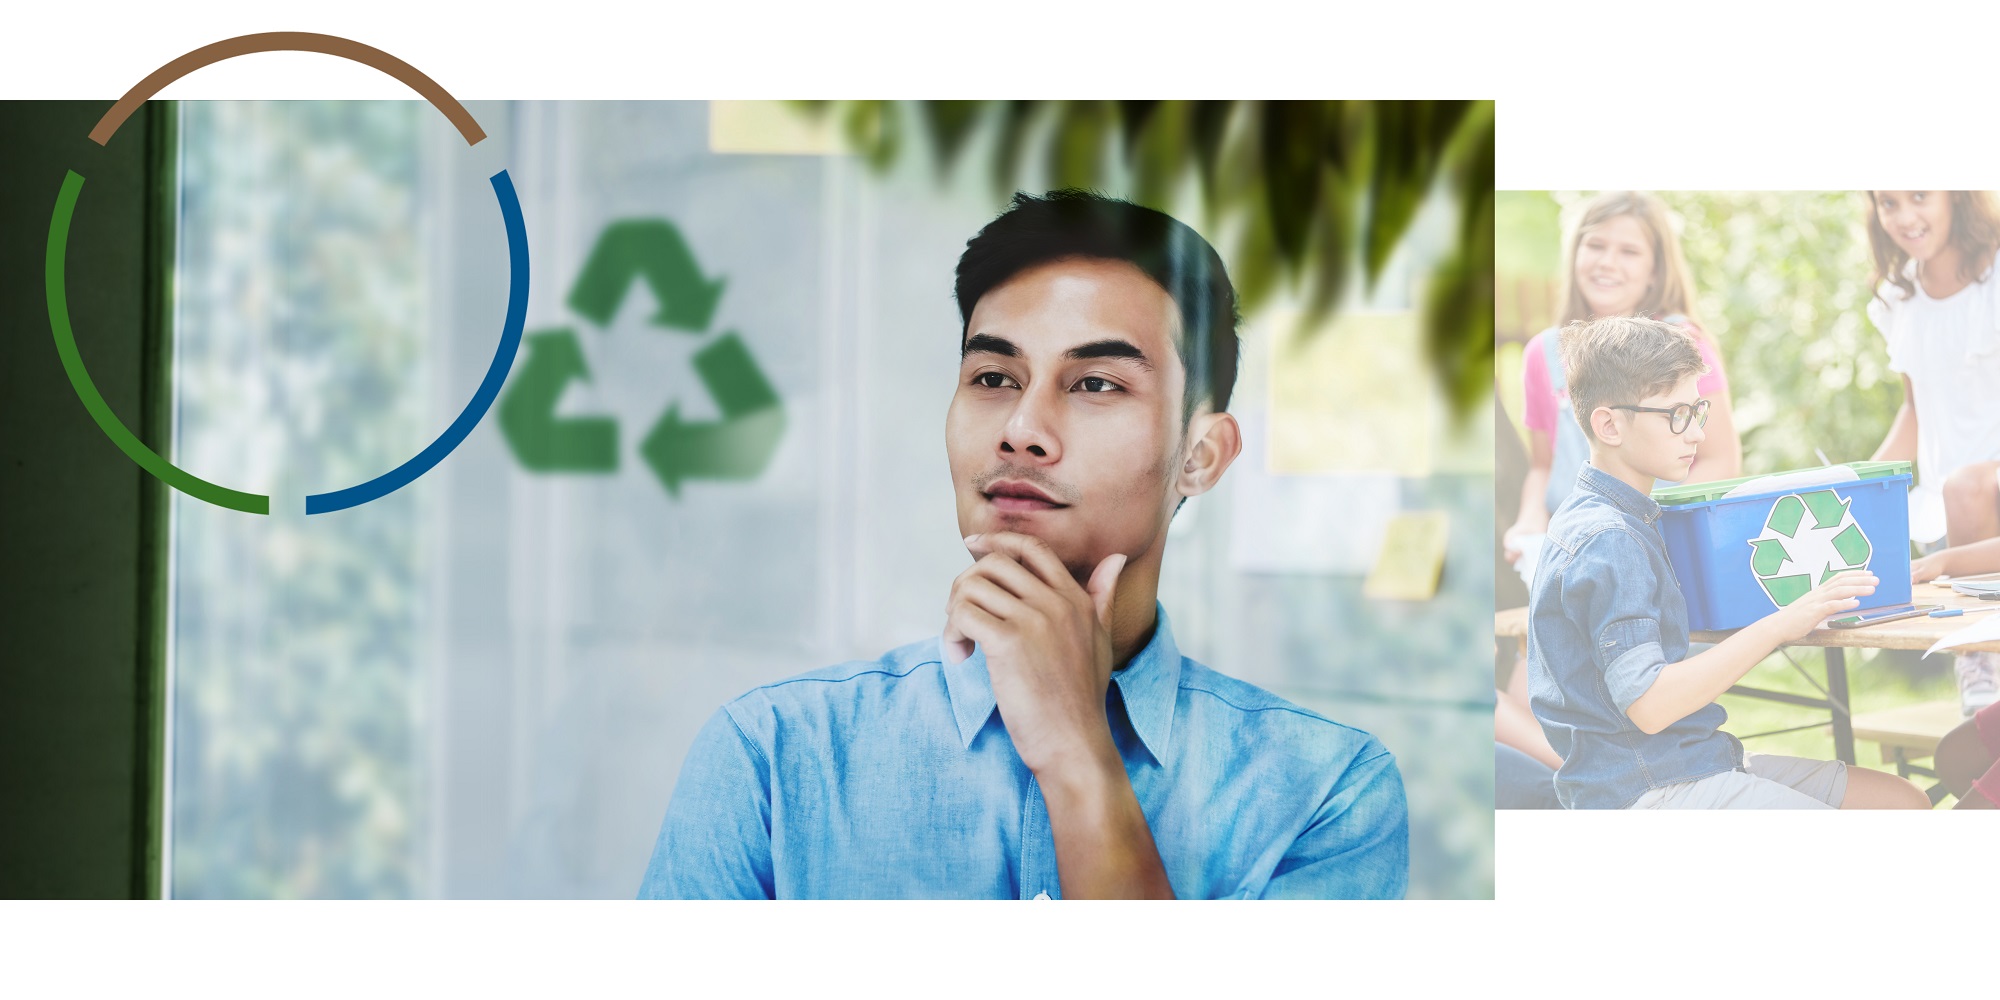 Worker looking at recycling logo